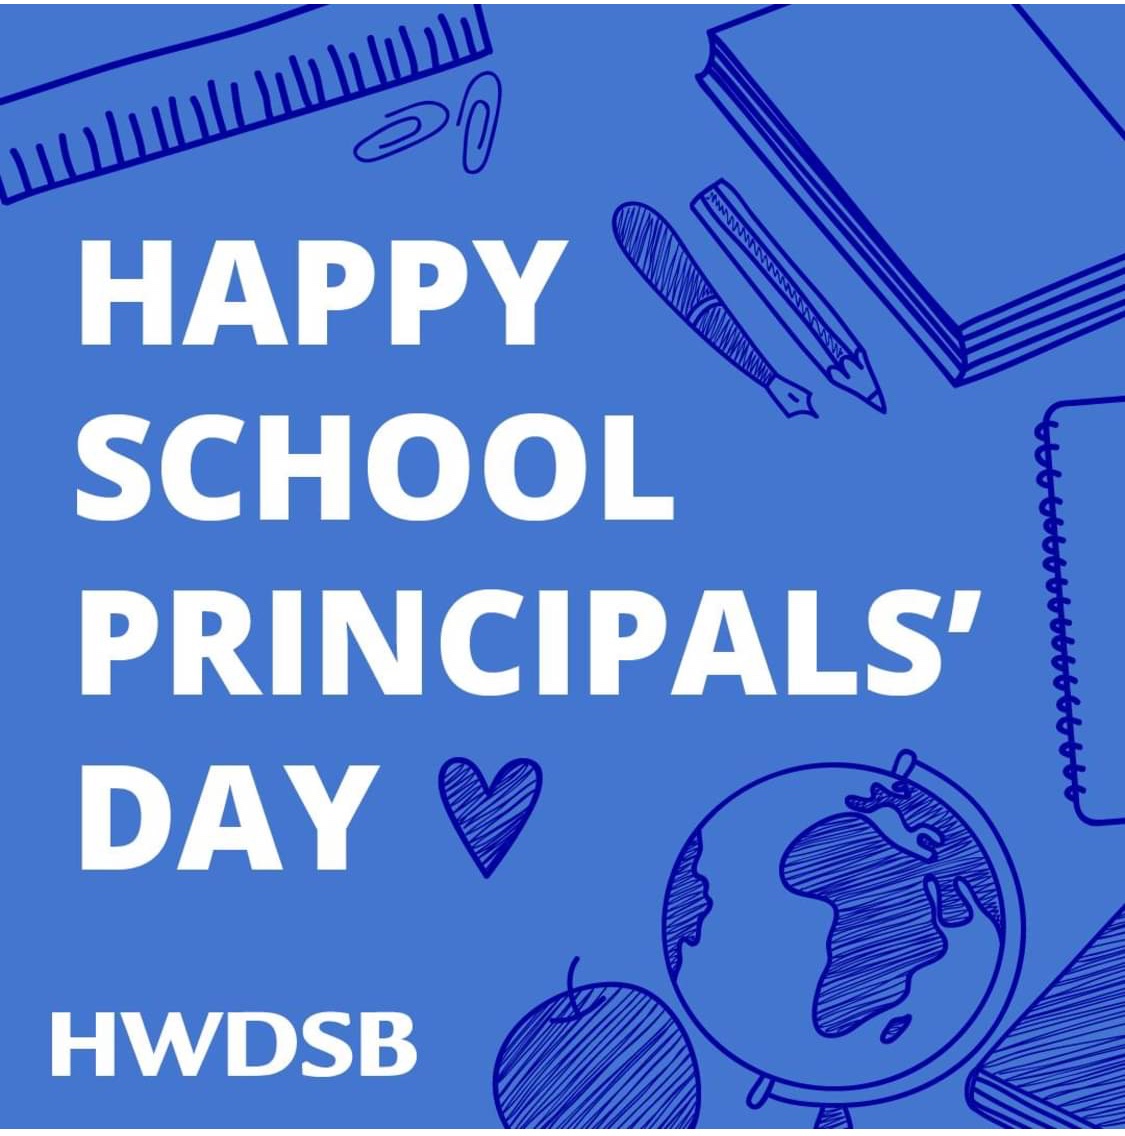 Happy School Principal Day! Thank you to the amazing HWDSB school leaders for all that you do to support school communities. Students, staff and families benefit from your leadership, guidance, and commitment to well-being and academic success.